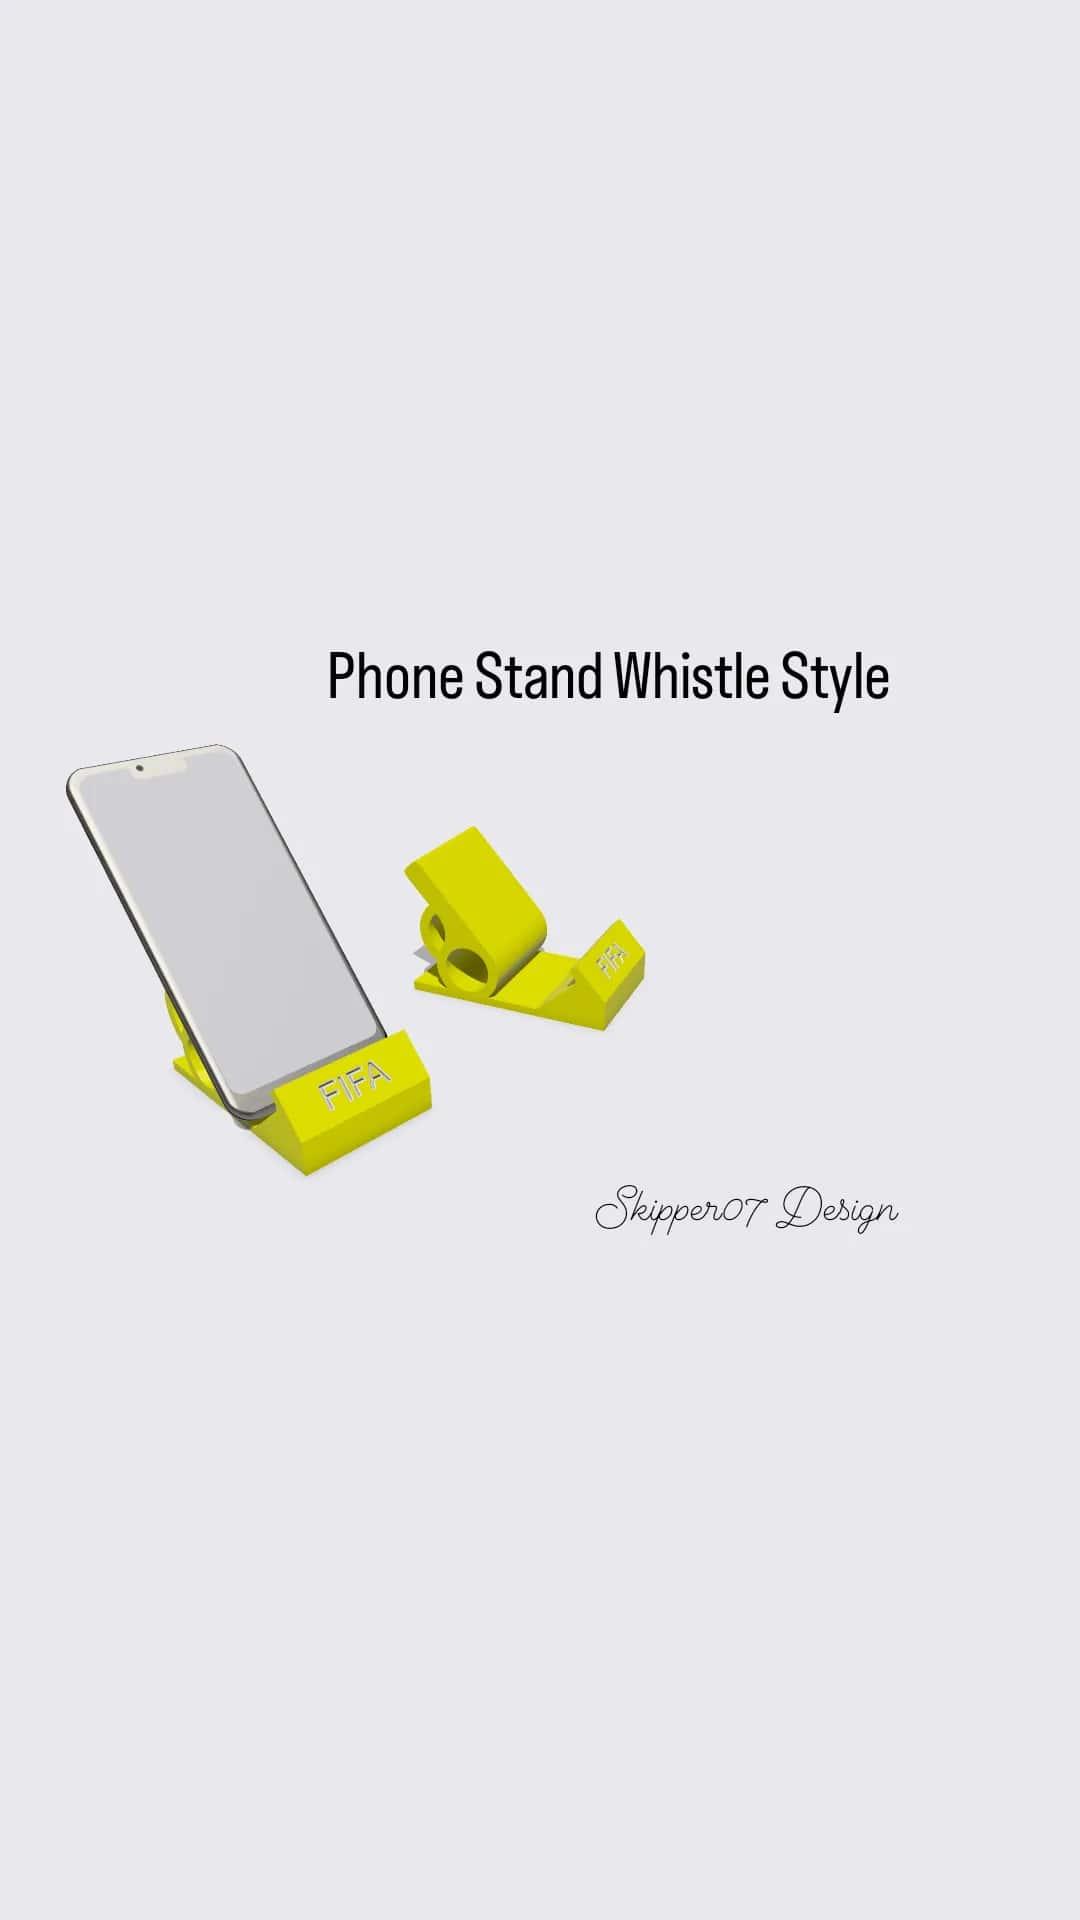 Phone Stand Whistle Style.stl 3d model